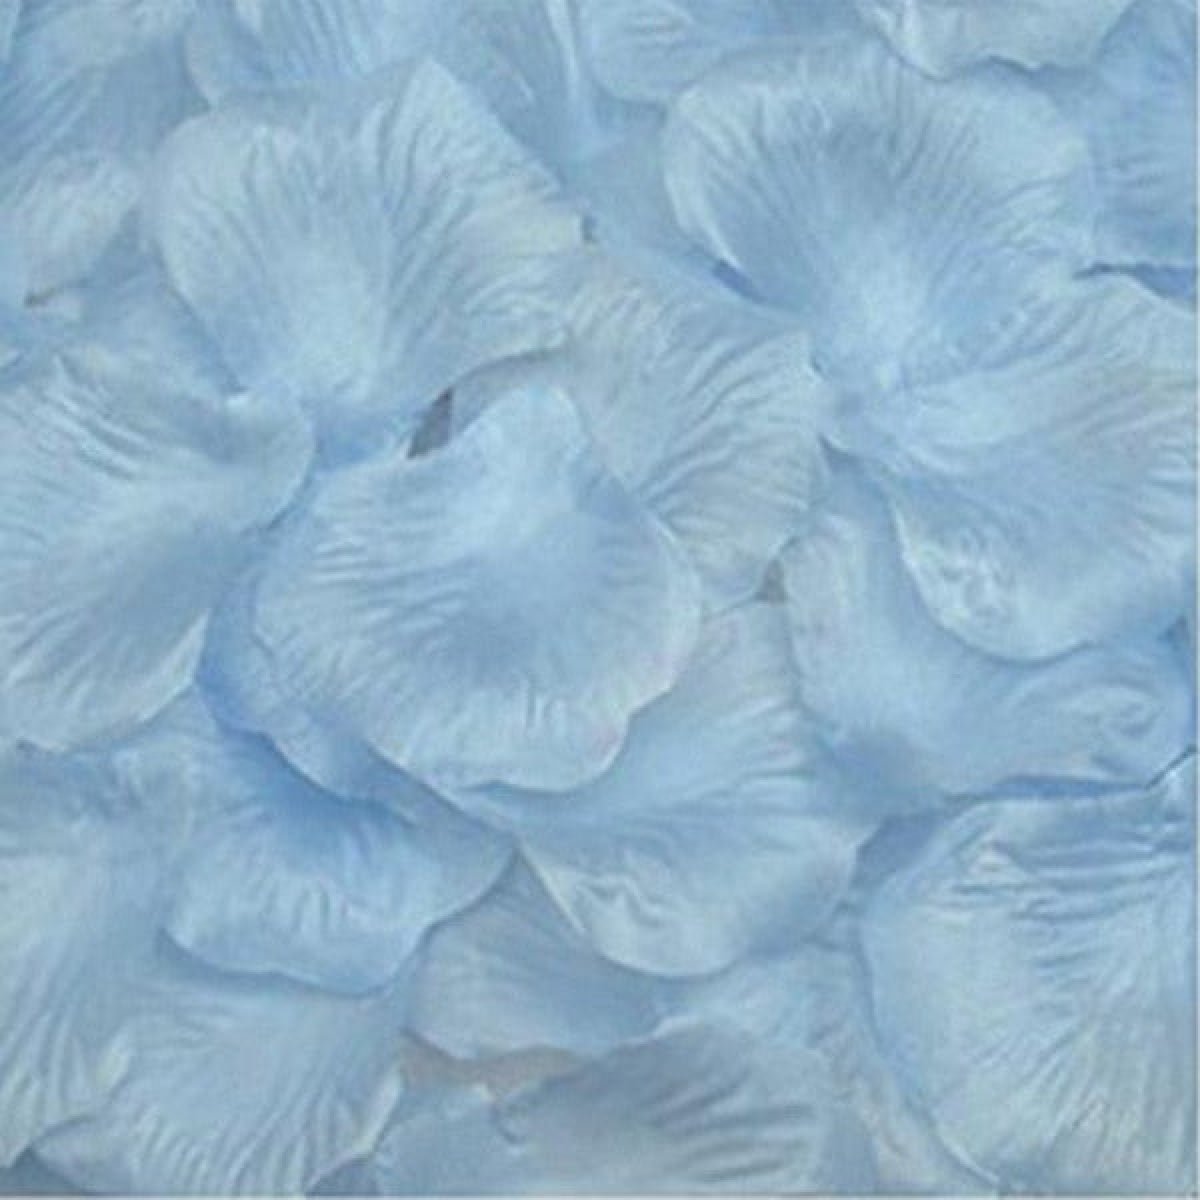 500pcs Rose Petals Flower Artificial Flowers Table Confetti Home Wedding Decorations - Light Blue - - Asia Sell